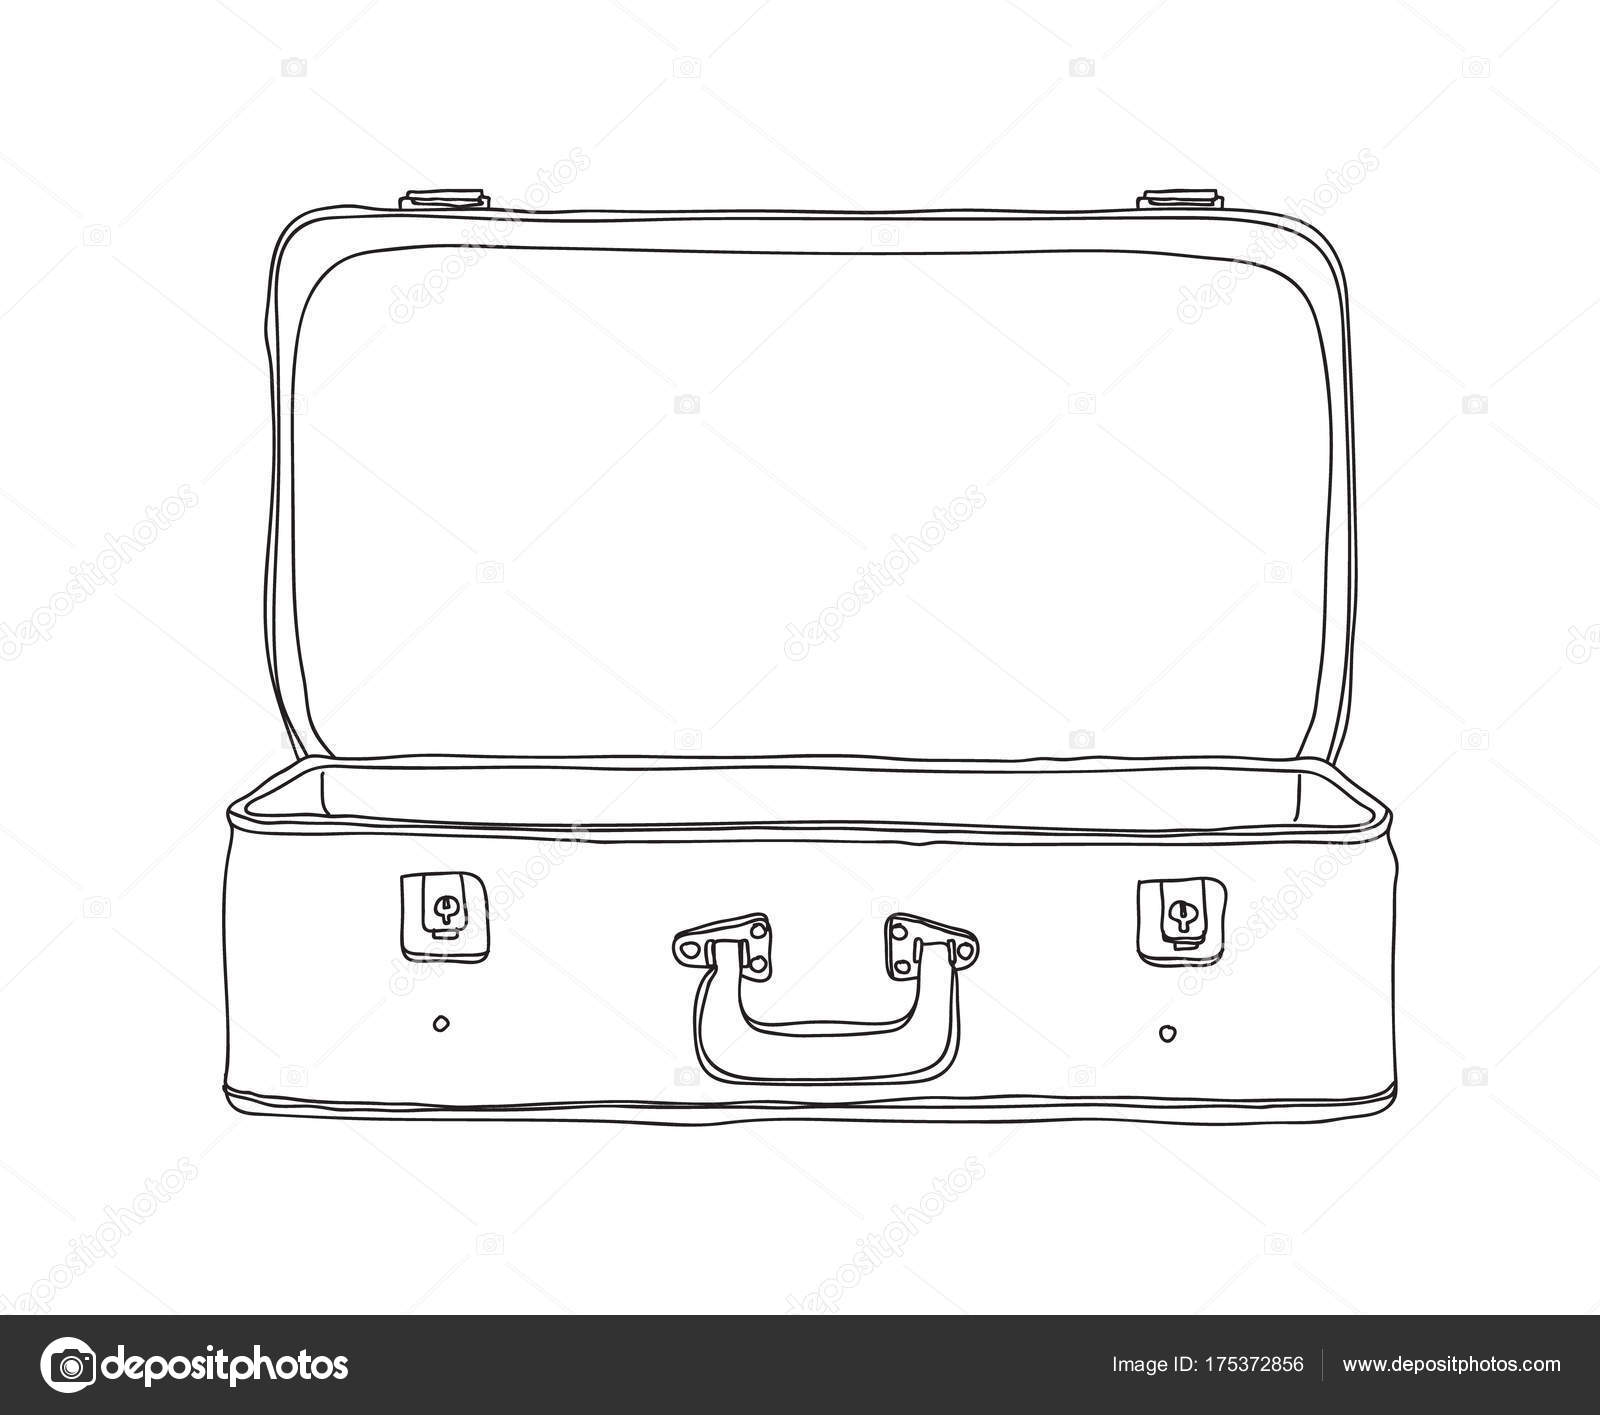 Suitcase Vintage Storage Luggage Empty and open hand drawn vecto Within Blank Suitcase Template